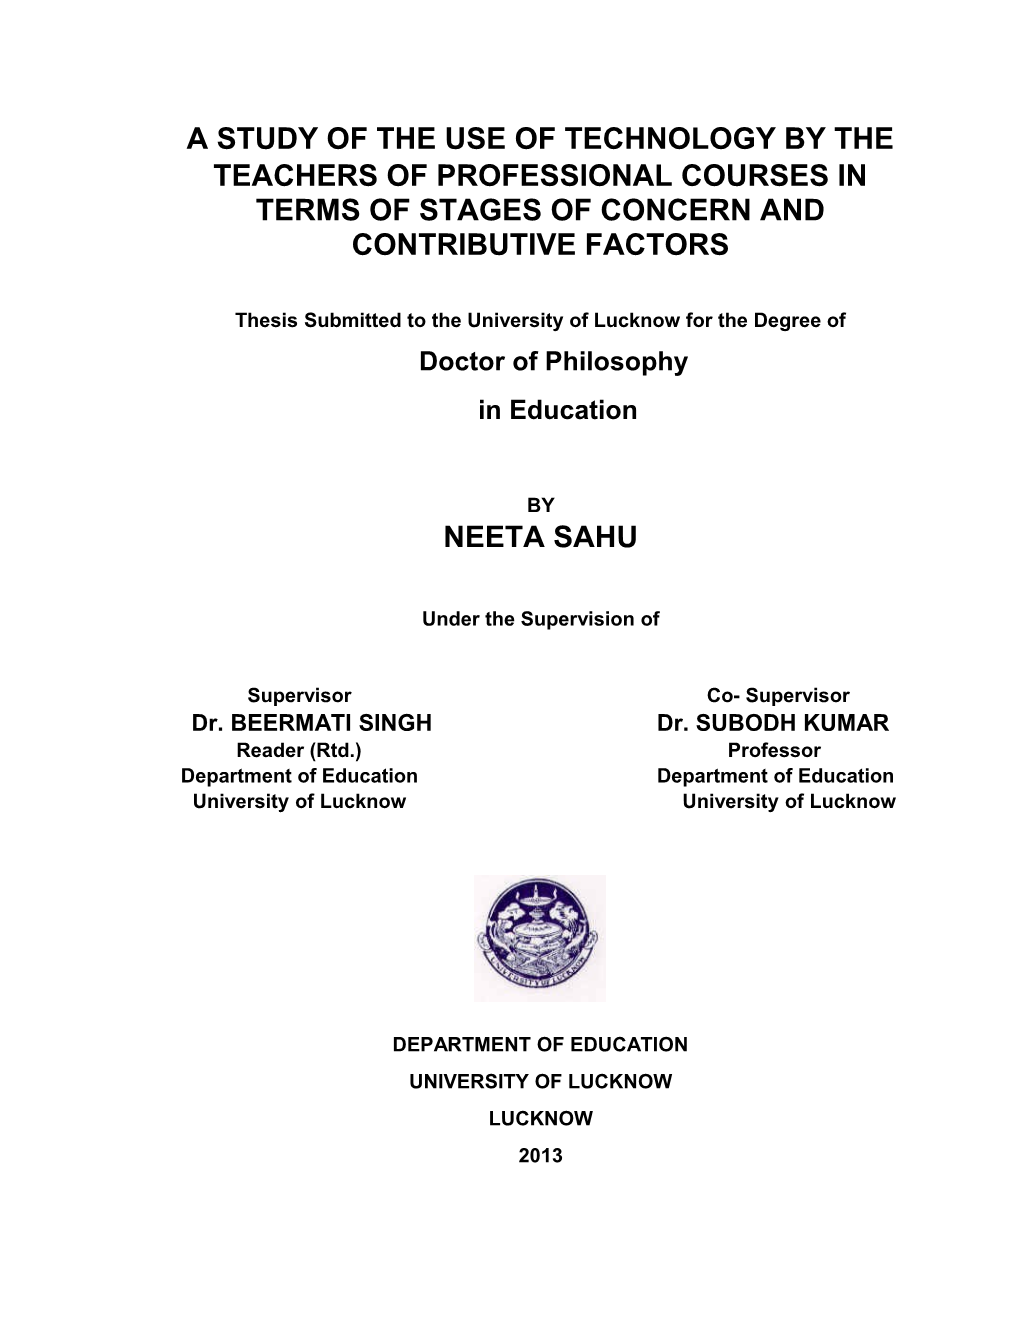 Teachers of Professional Courses in Terms of Stages of Concern and Contributive Factors